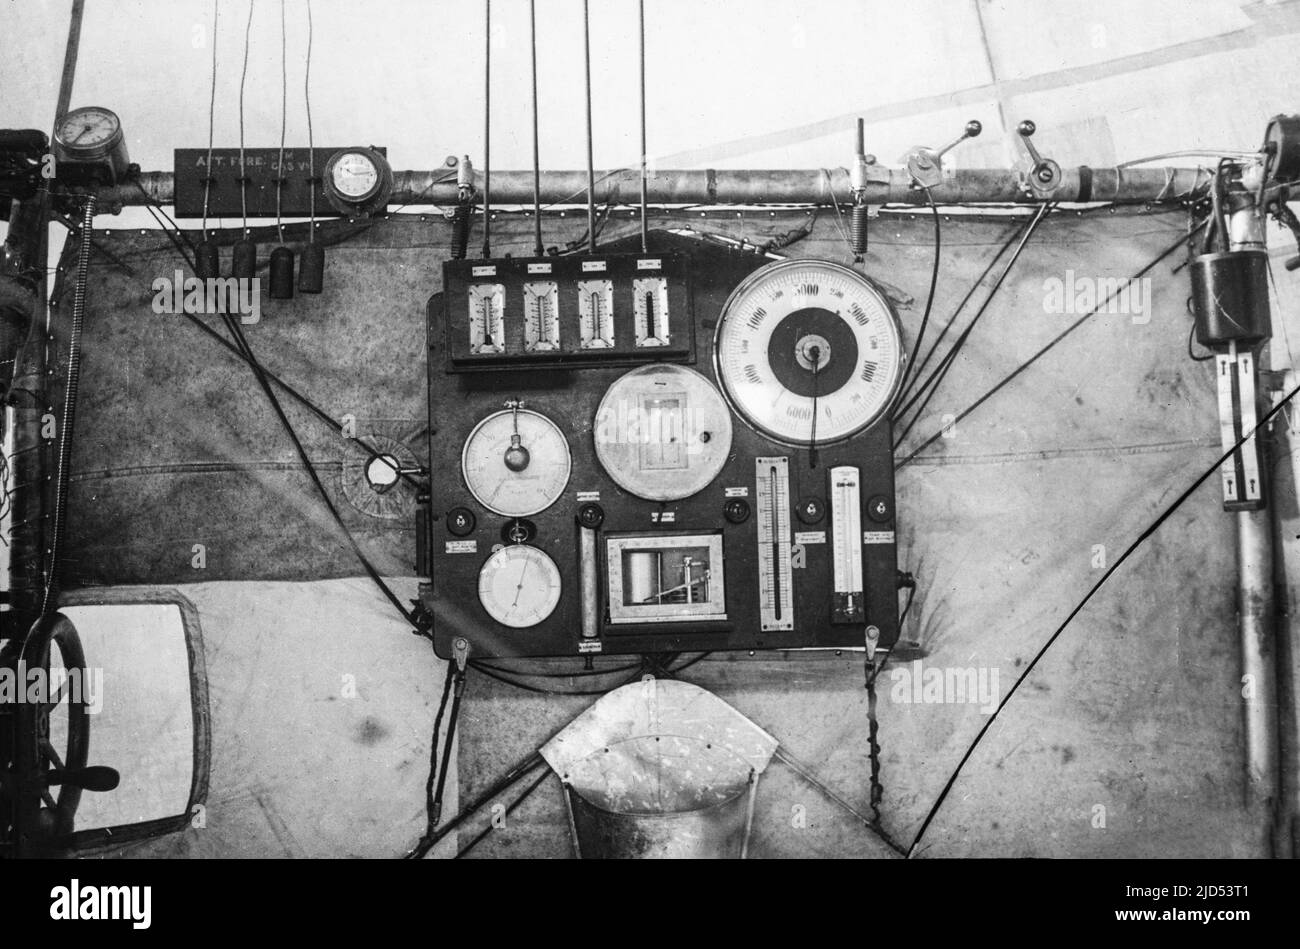 The instrument panel of the British Airship Gamma, built in 1910 for the Royal Flying Corps, before being used by The Royal Naval Air Service.Broken up in 1914. Stock Photo